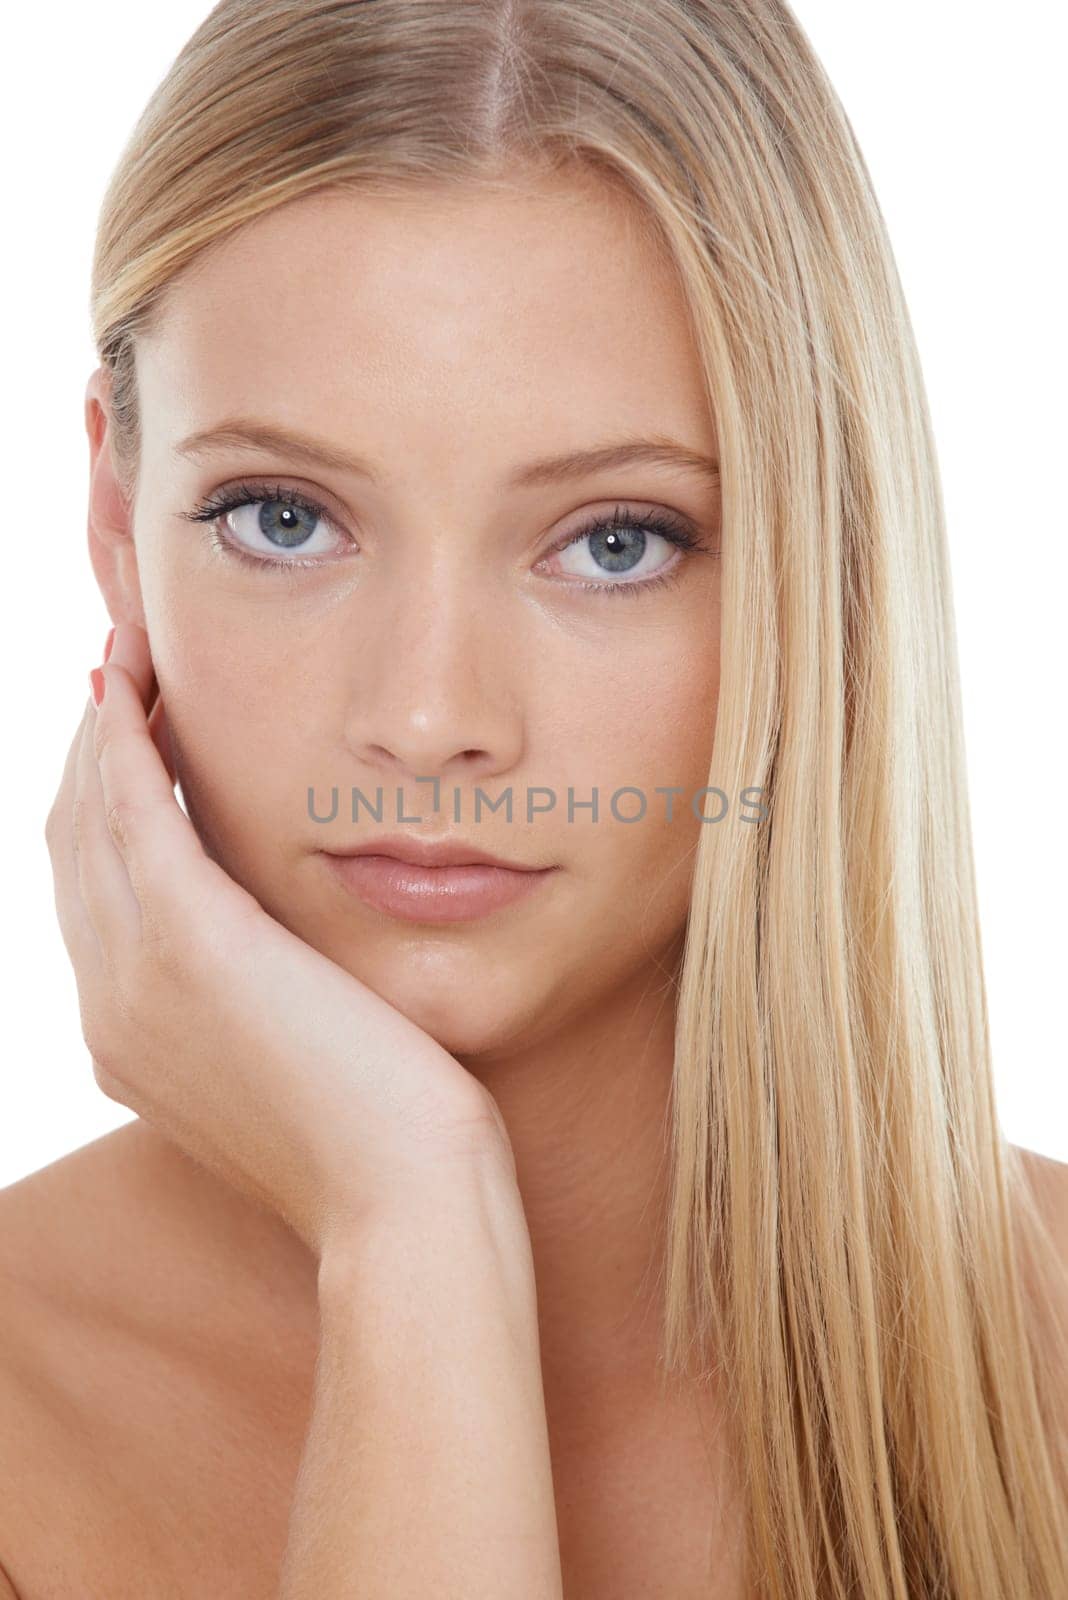 Woman, portrait and beauty with cosmetics in studio for hair care, botox treatment and shampoo shine. Model, person and confidence with skincare, collagen texture and hairstyle on white background.